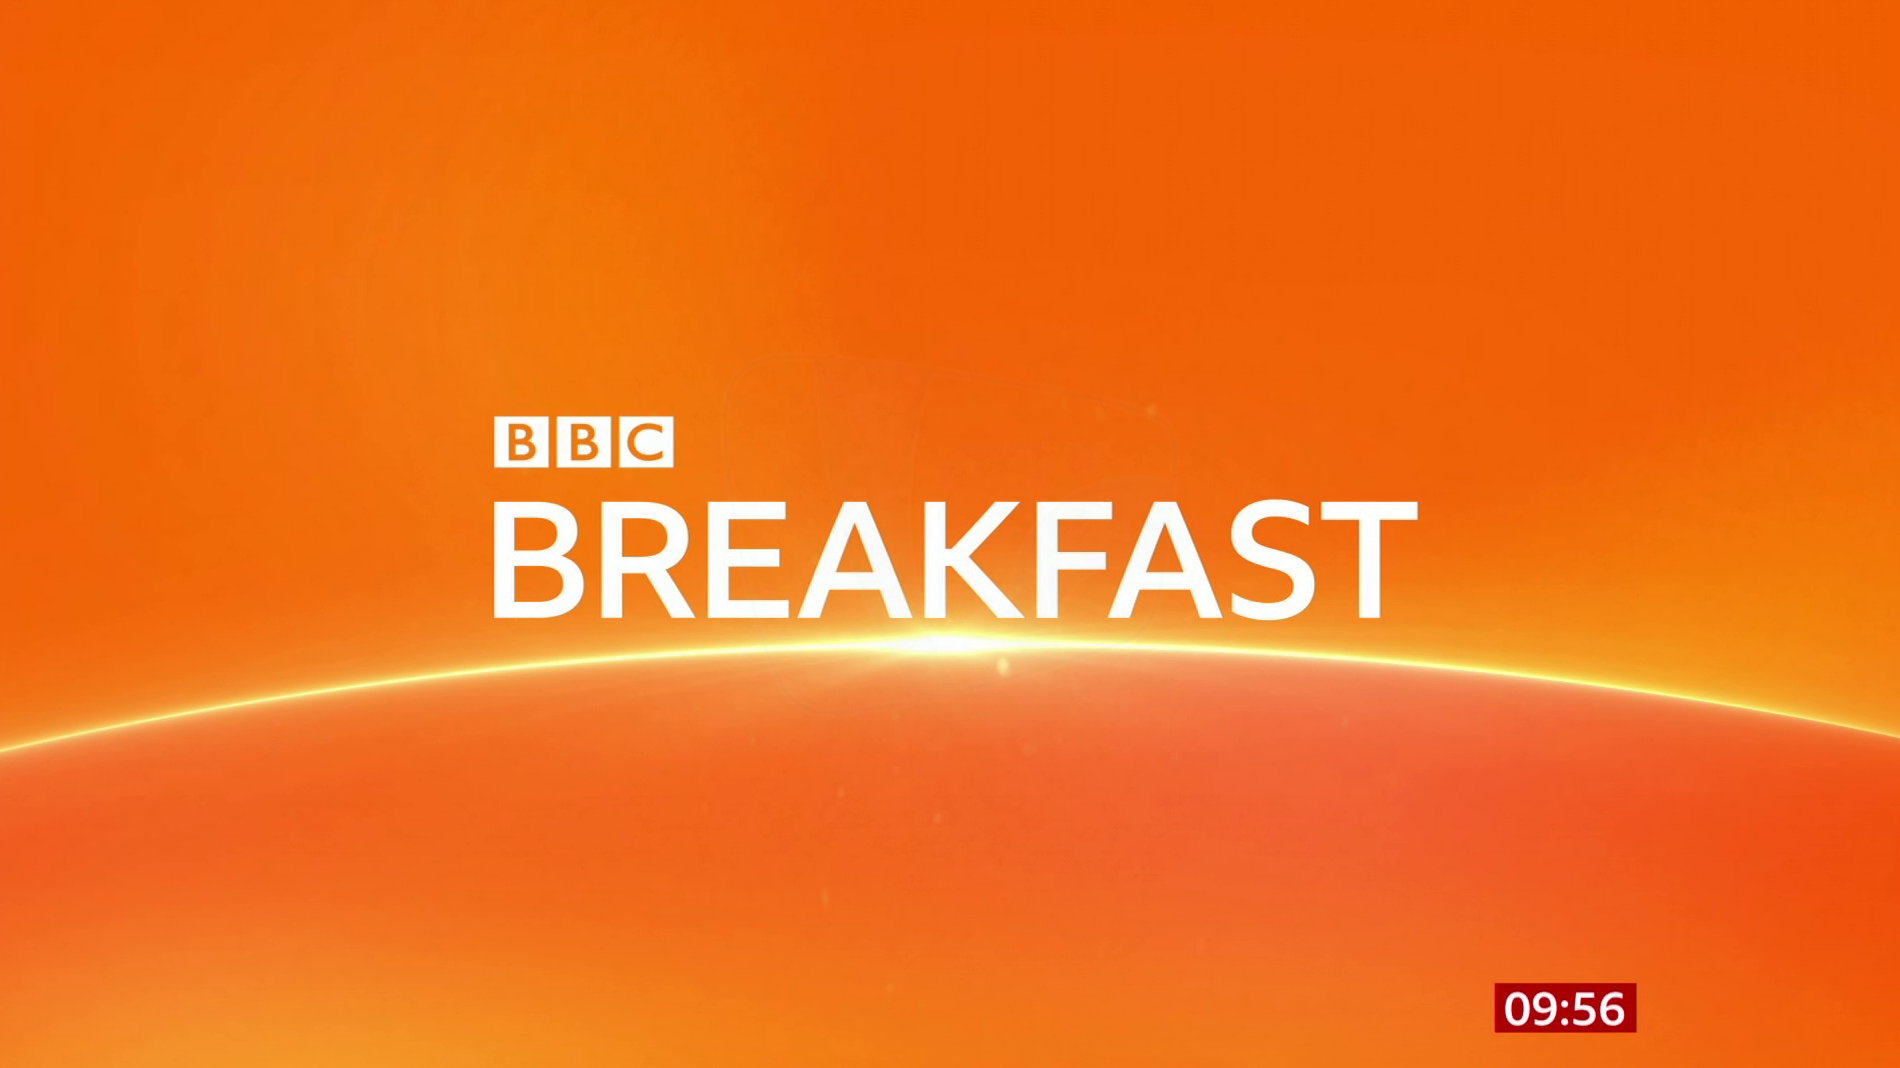 BBC Breakfast taken off the air by fire alarm - Clean Feed